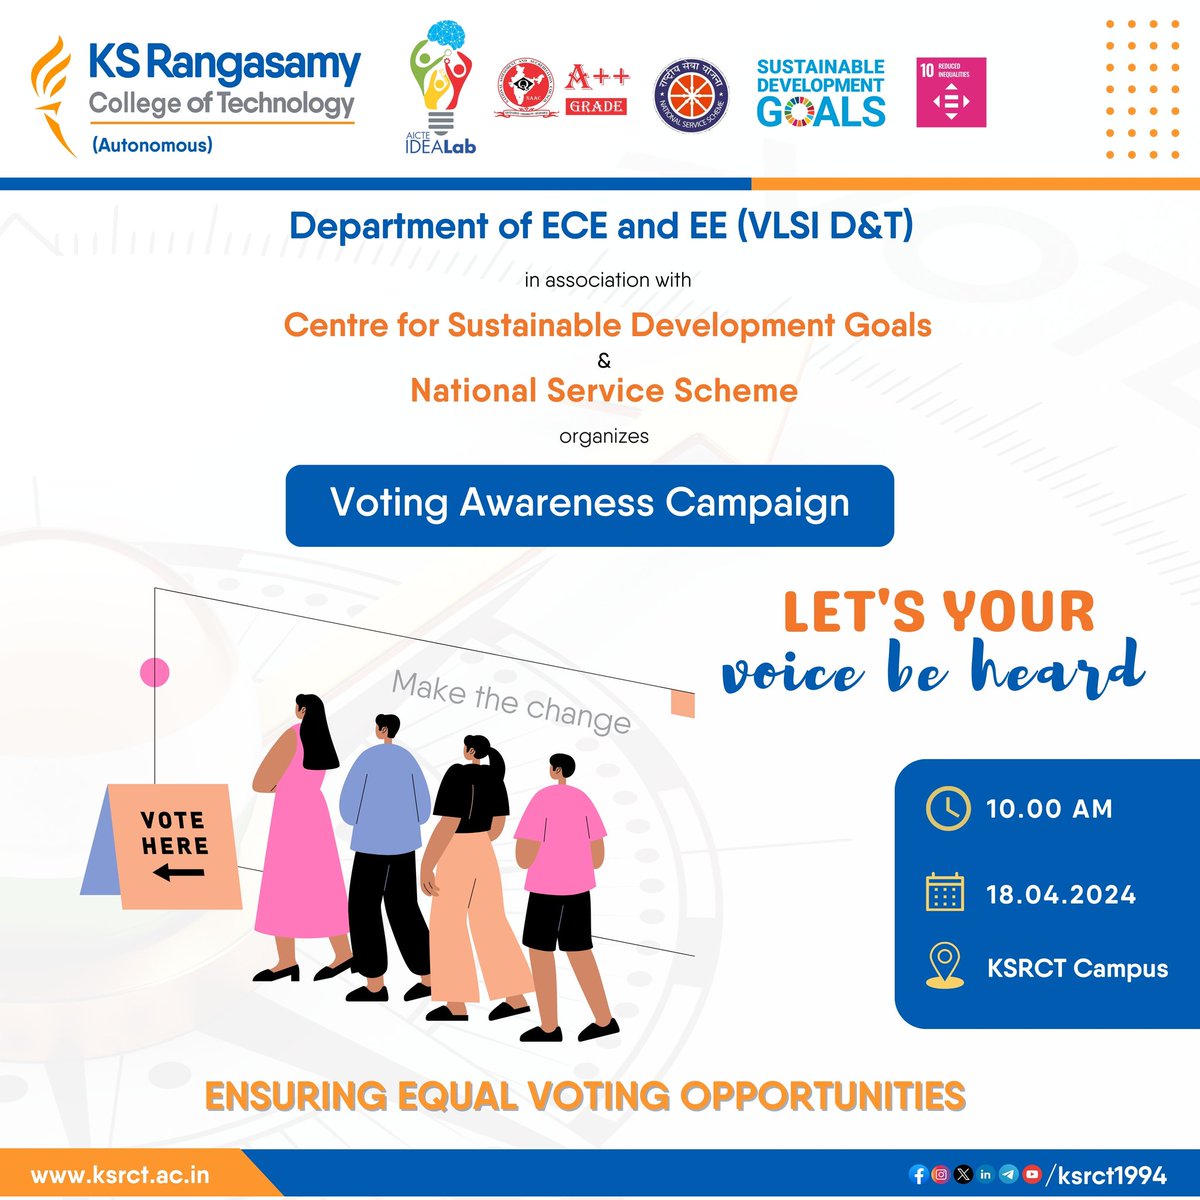 Department of ECE & EE (VLSI D&T) #ksrct1994 in association with Centre for sustainable development goals #SDG and #NSS joinly organizes 'Voting #AwarenessCampaign - Ensuring Equal Voting opportunities' to address the #equalrights among  #voters on April 18, 2024